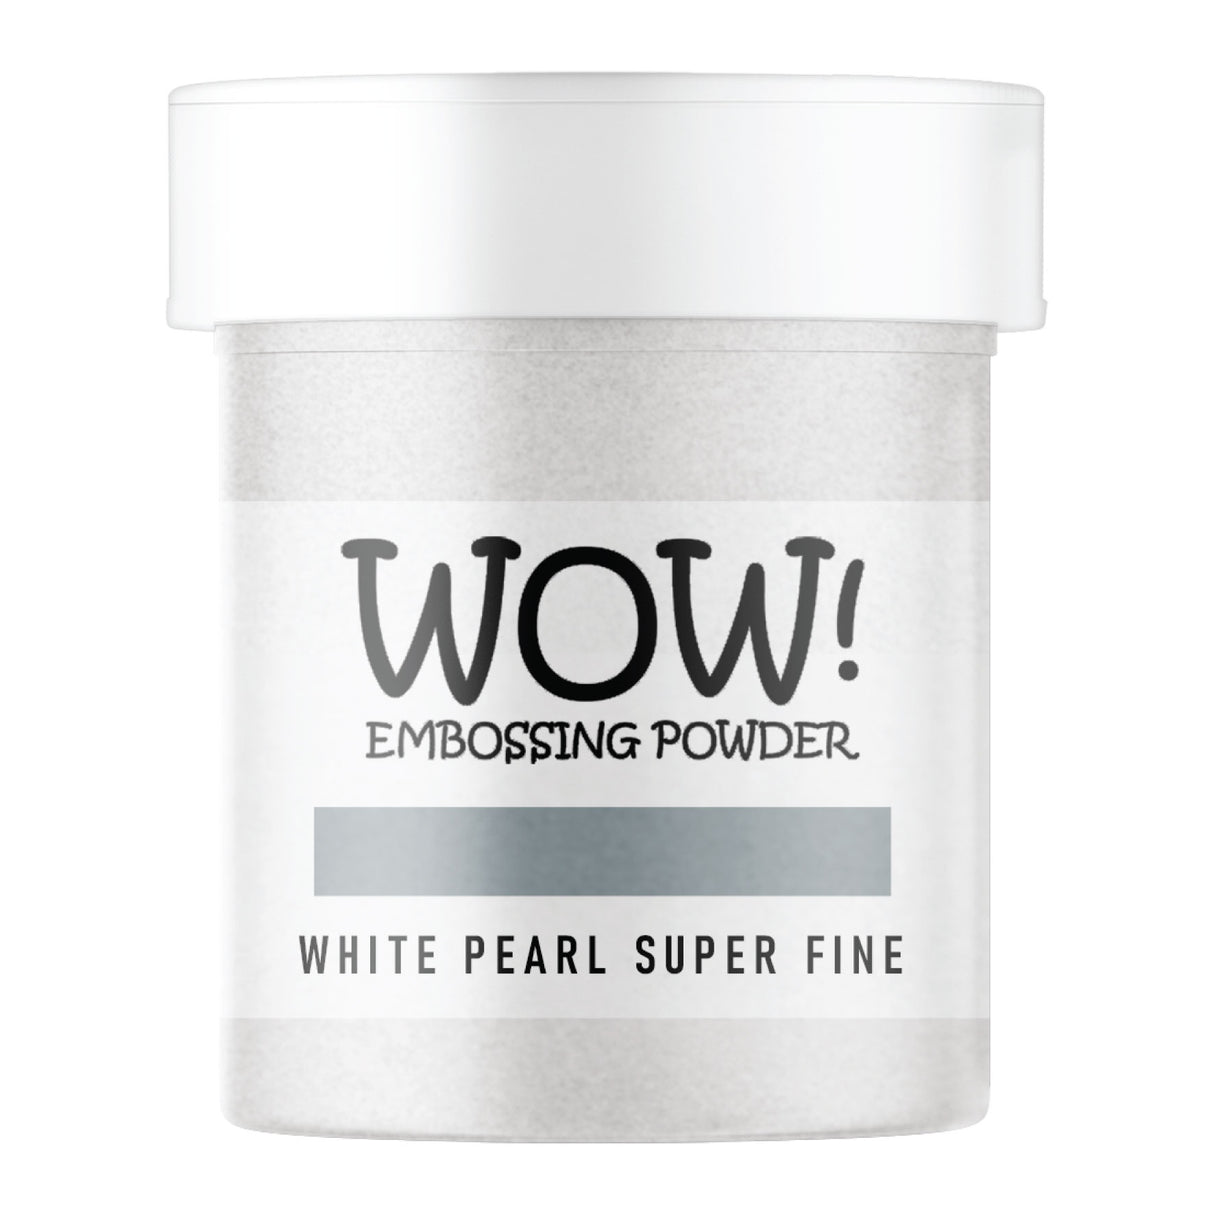 WOW Embossing Powder White Pearl Superfine Large Jar